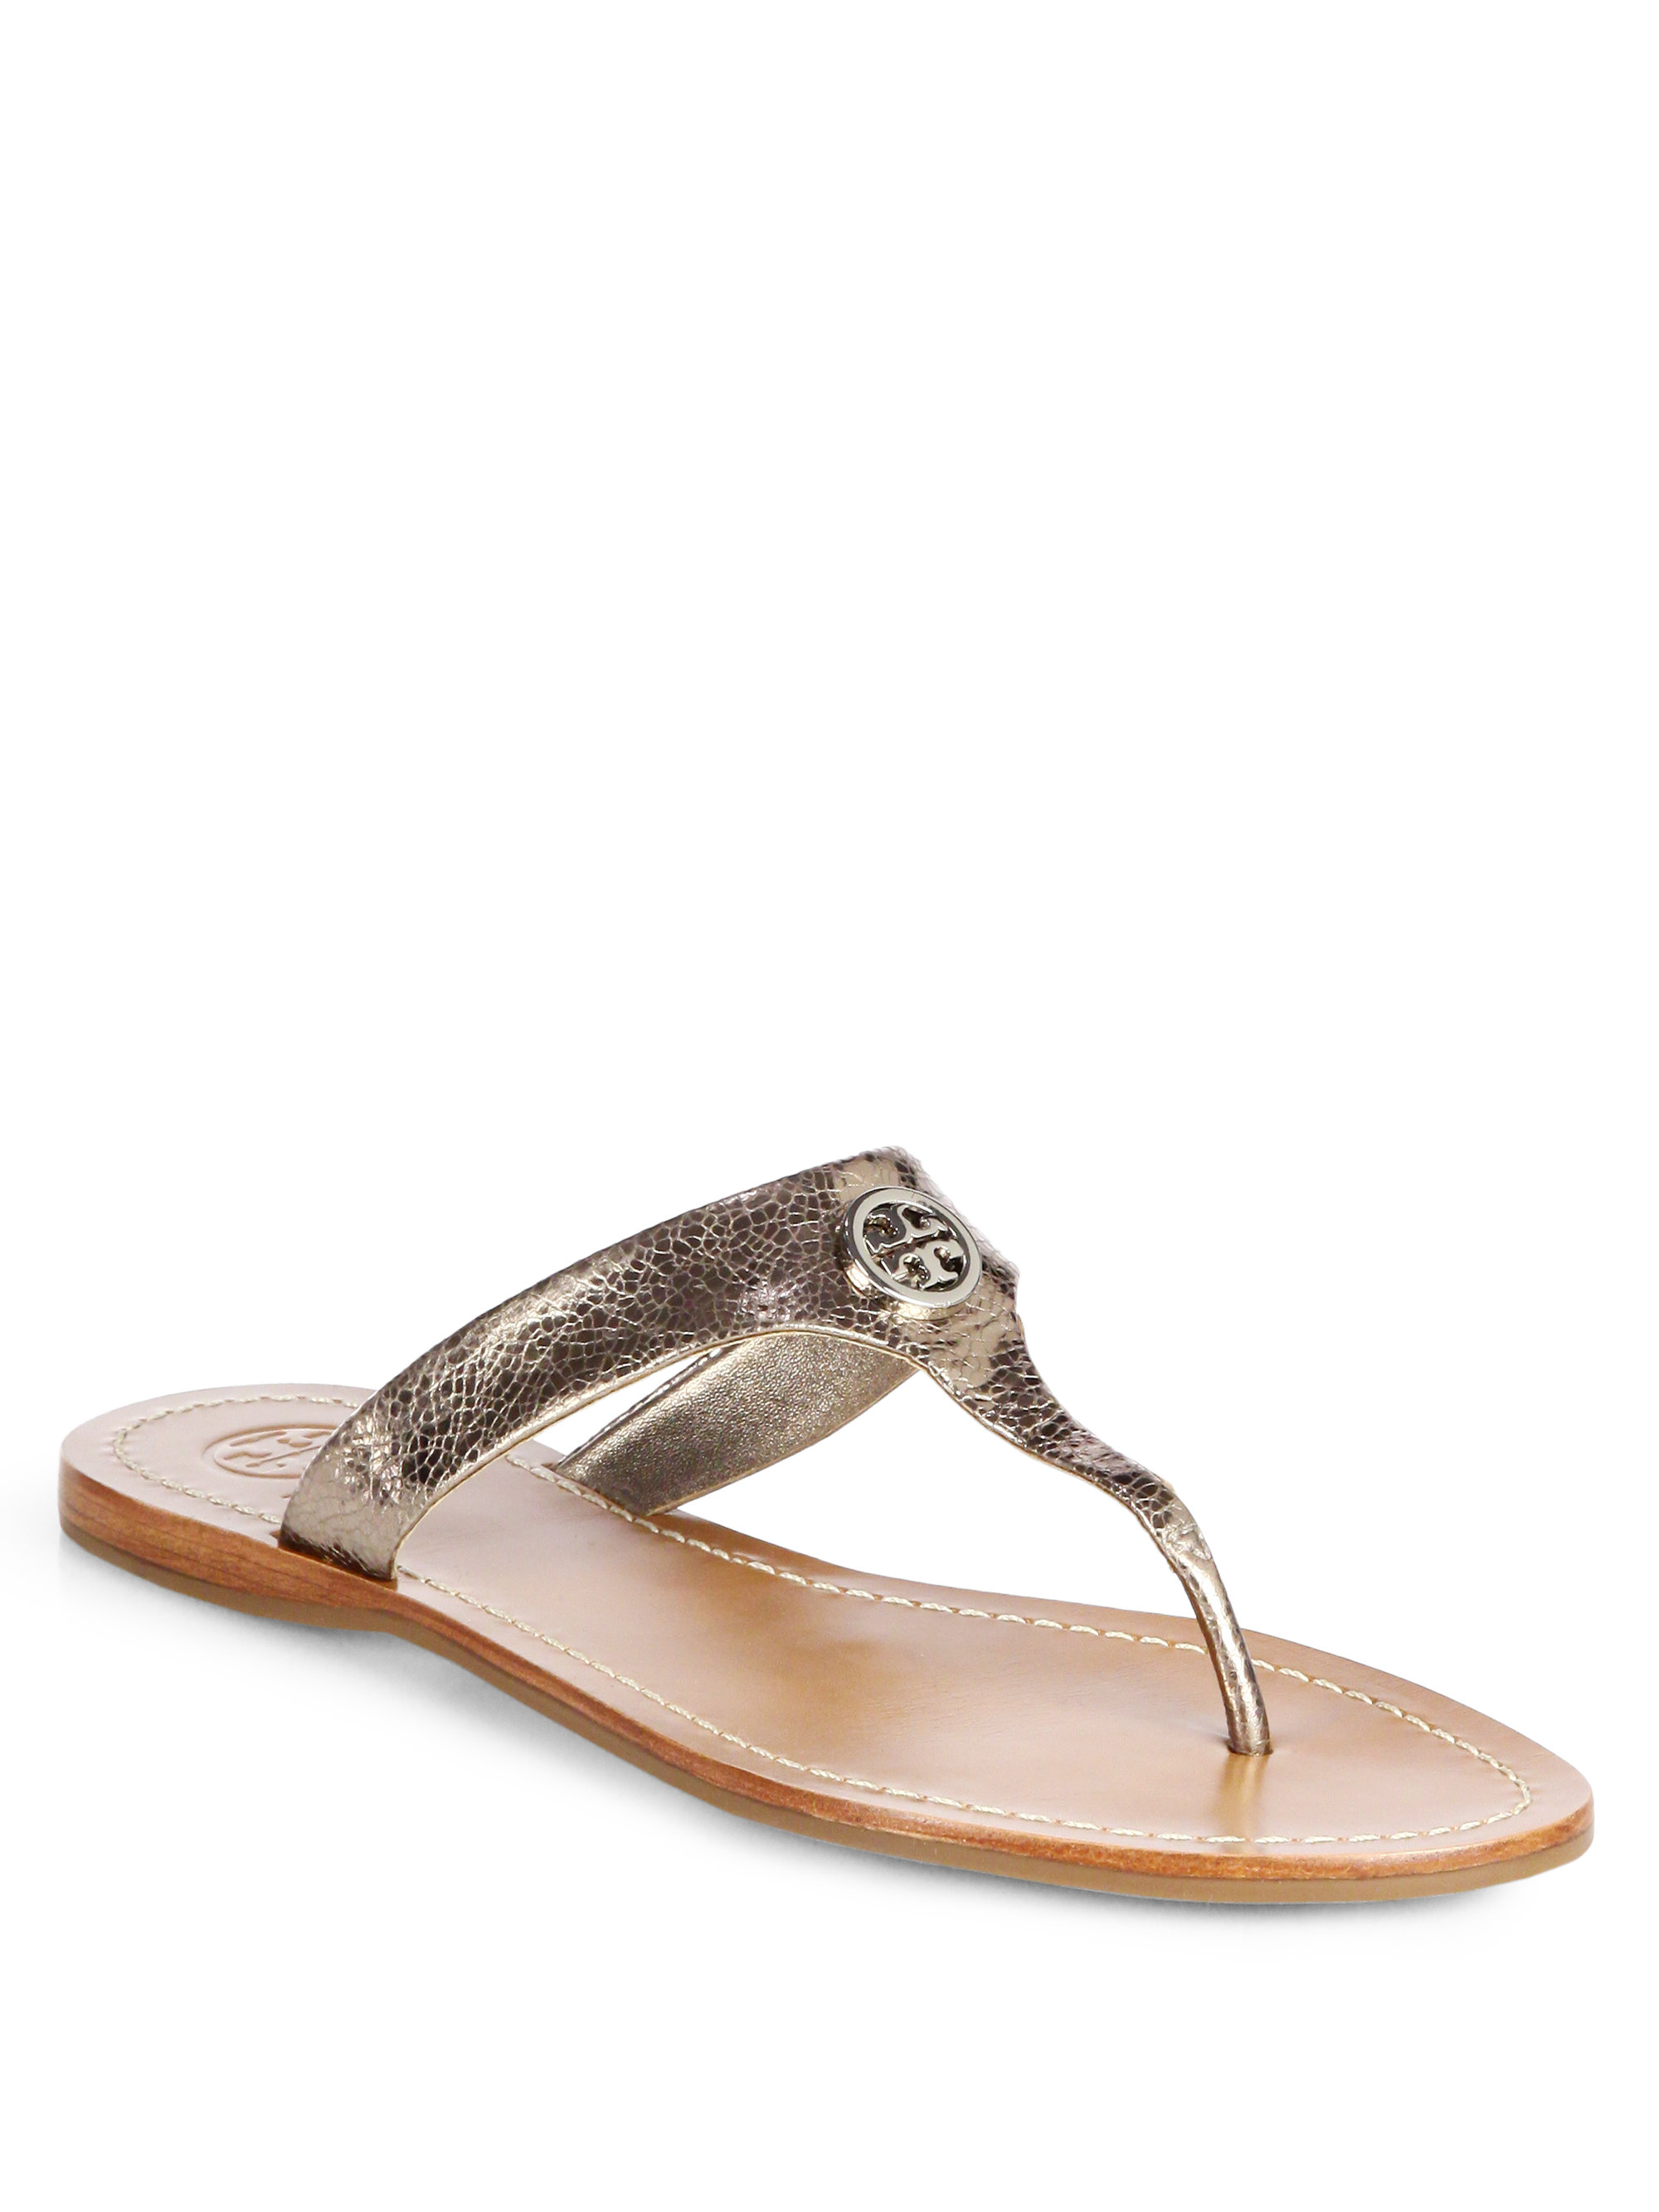 Lyst - Tory Burch Cameron Crackled Metallic Leather Thong Sandals in